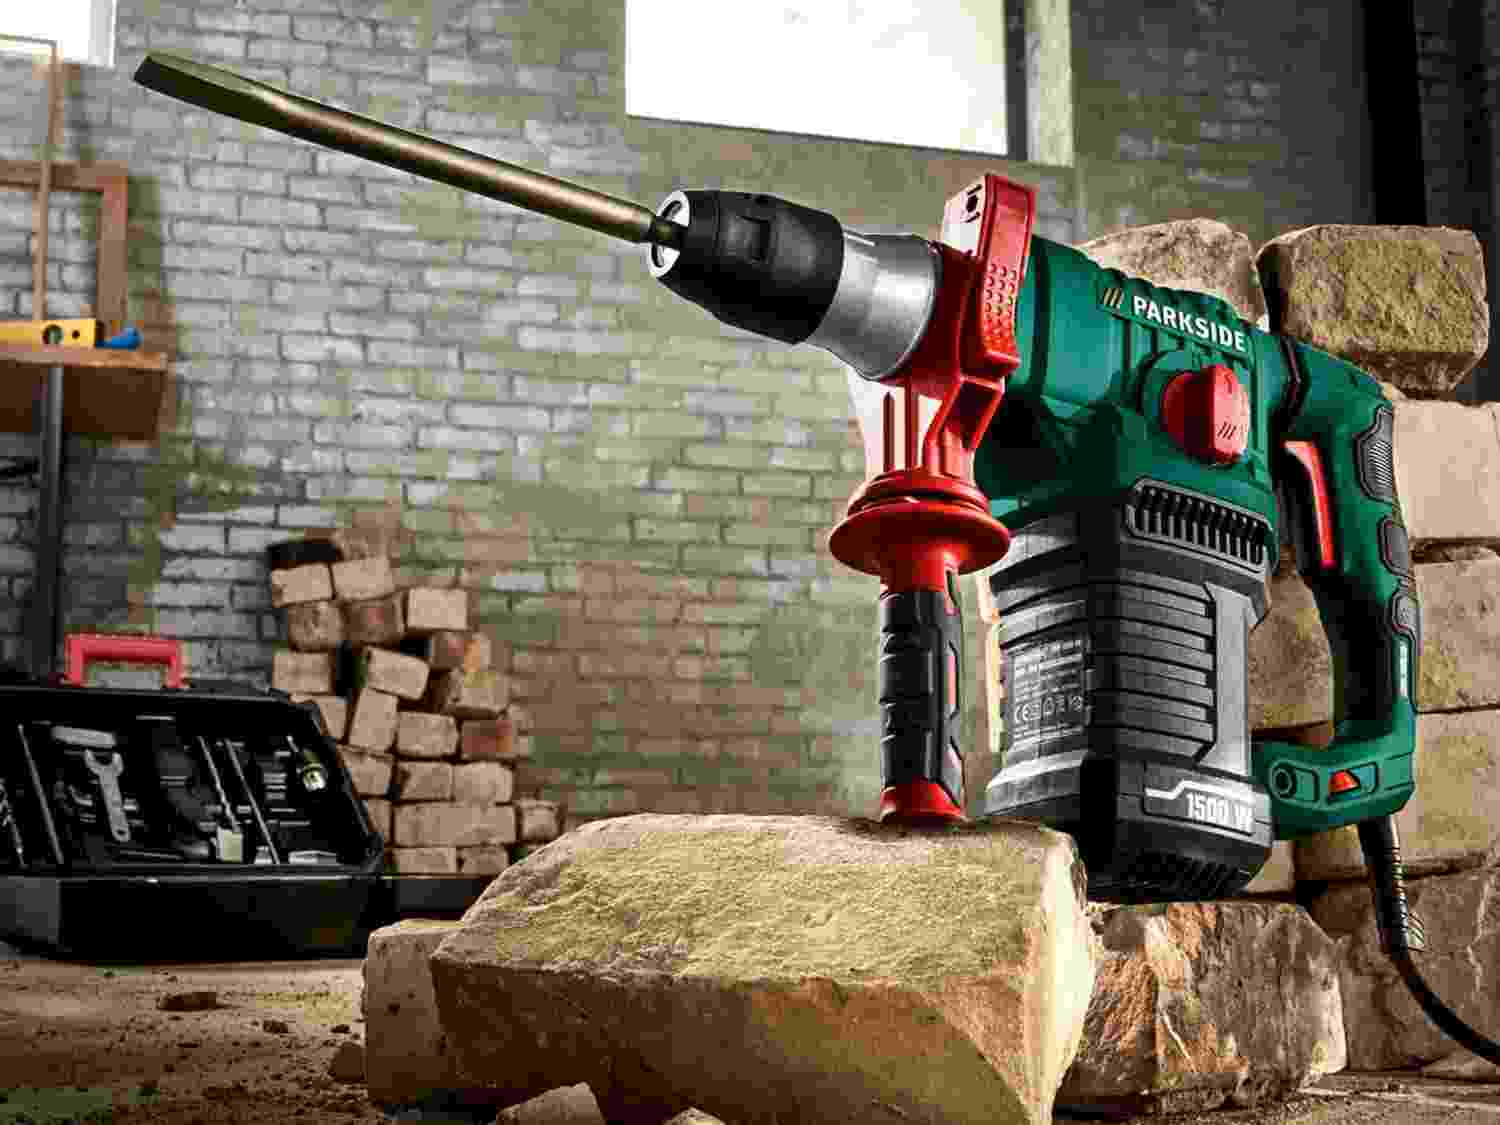 PARKSIDE® Rotary Hammer PBH 1500w